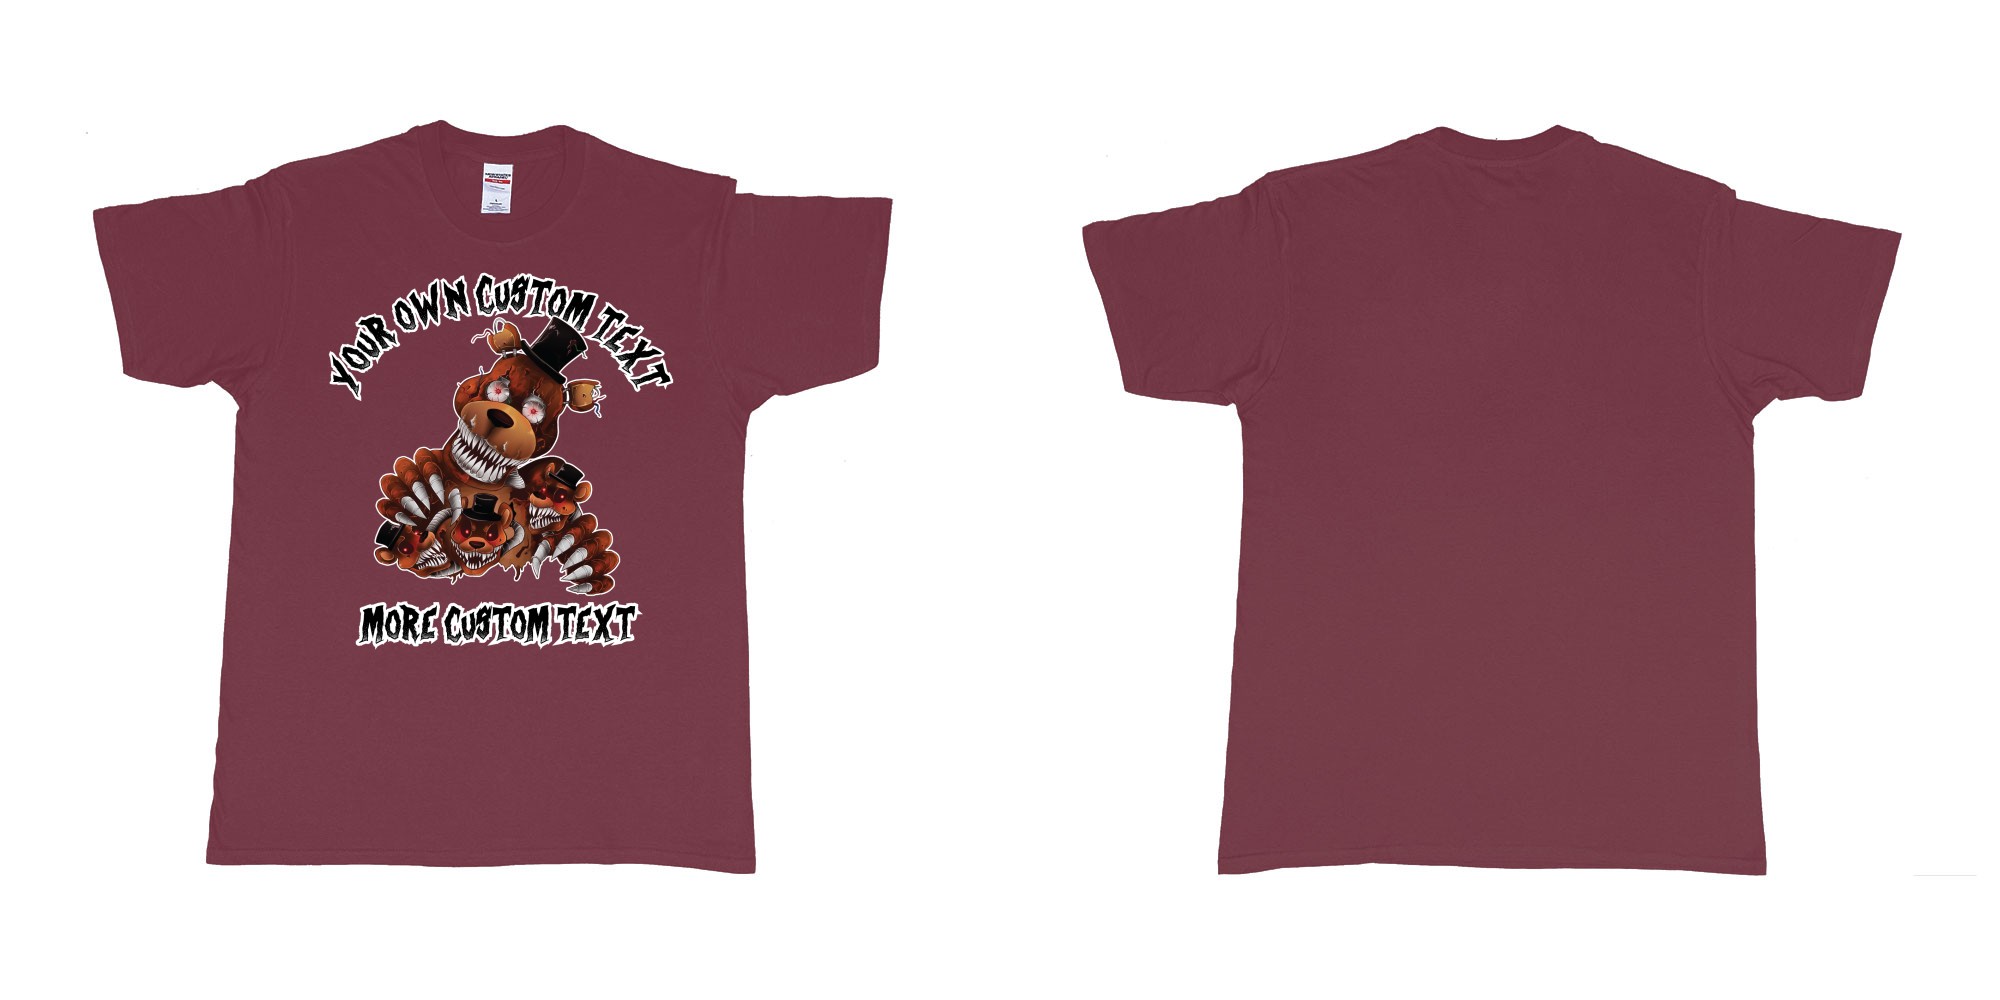 Custom tshirt design five nights at freddy scary bears in fabric color marron choice your own text made in Bali by The Pirate Way